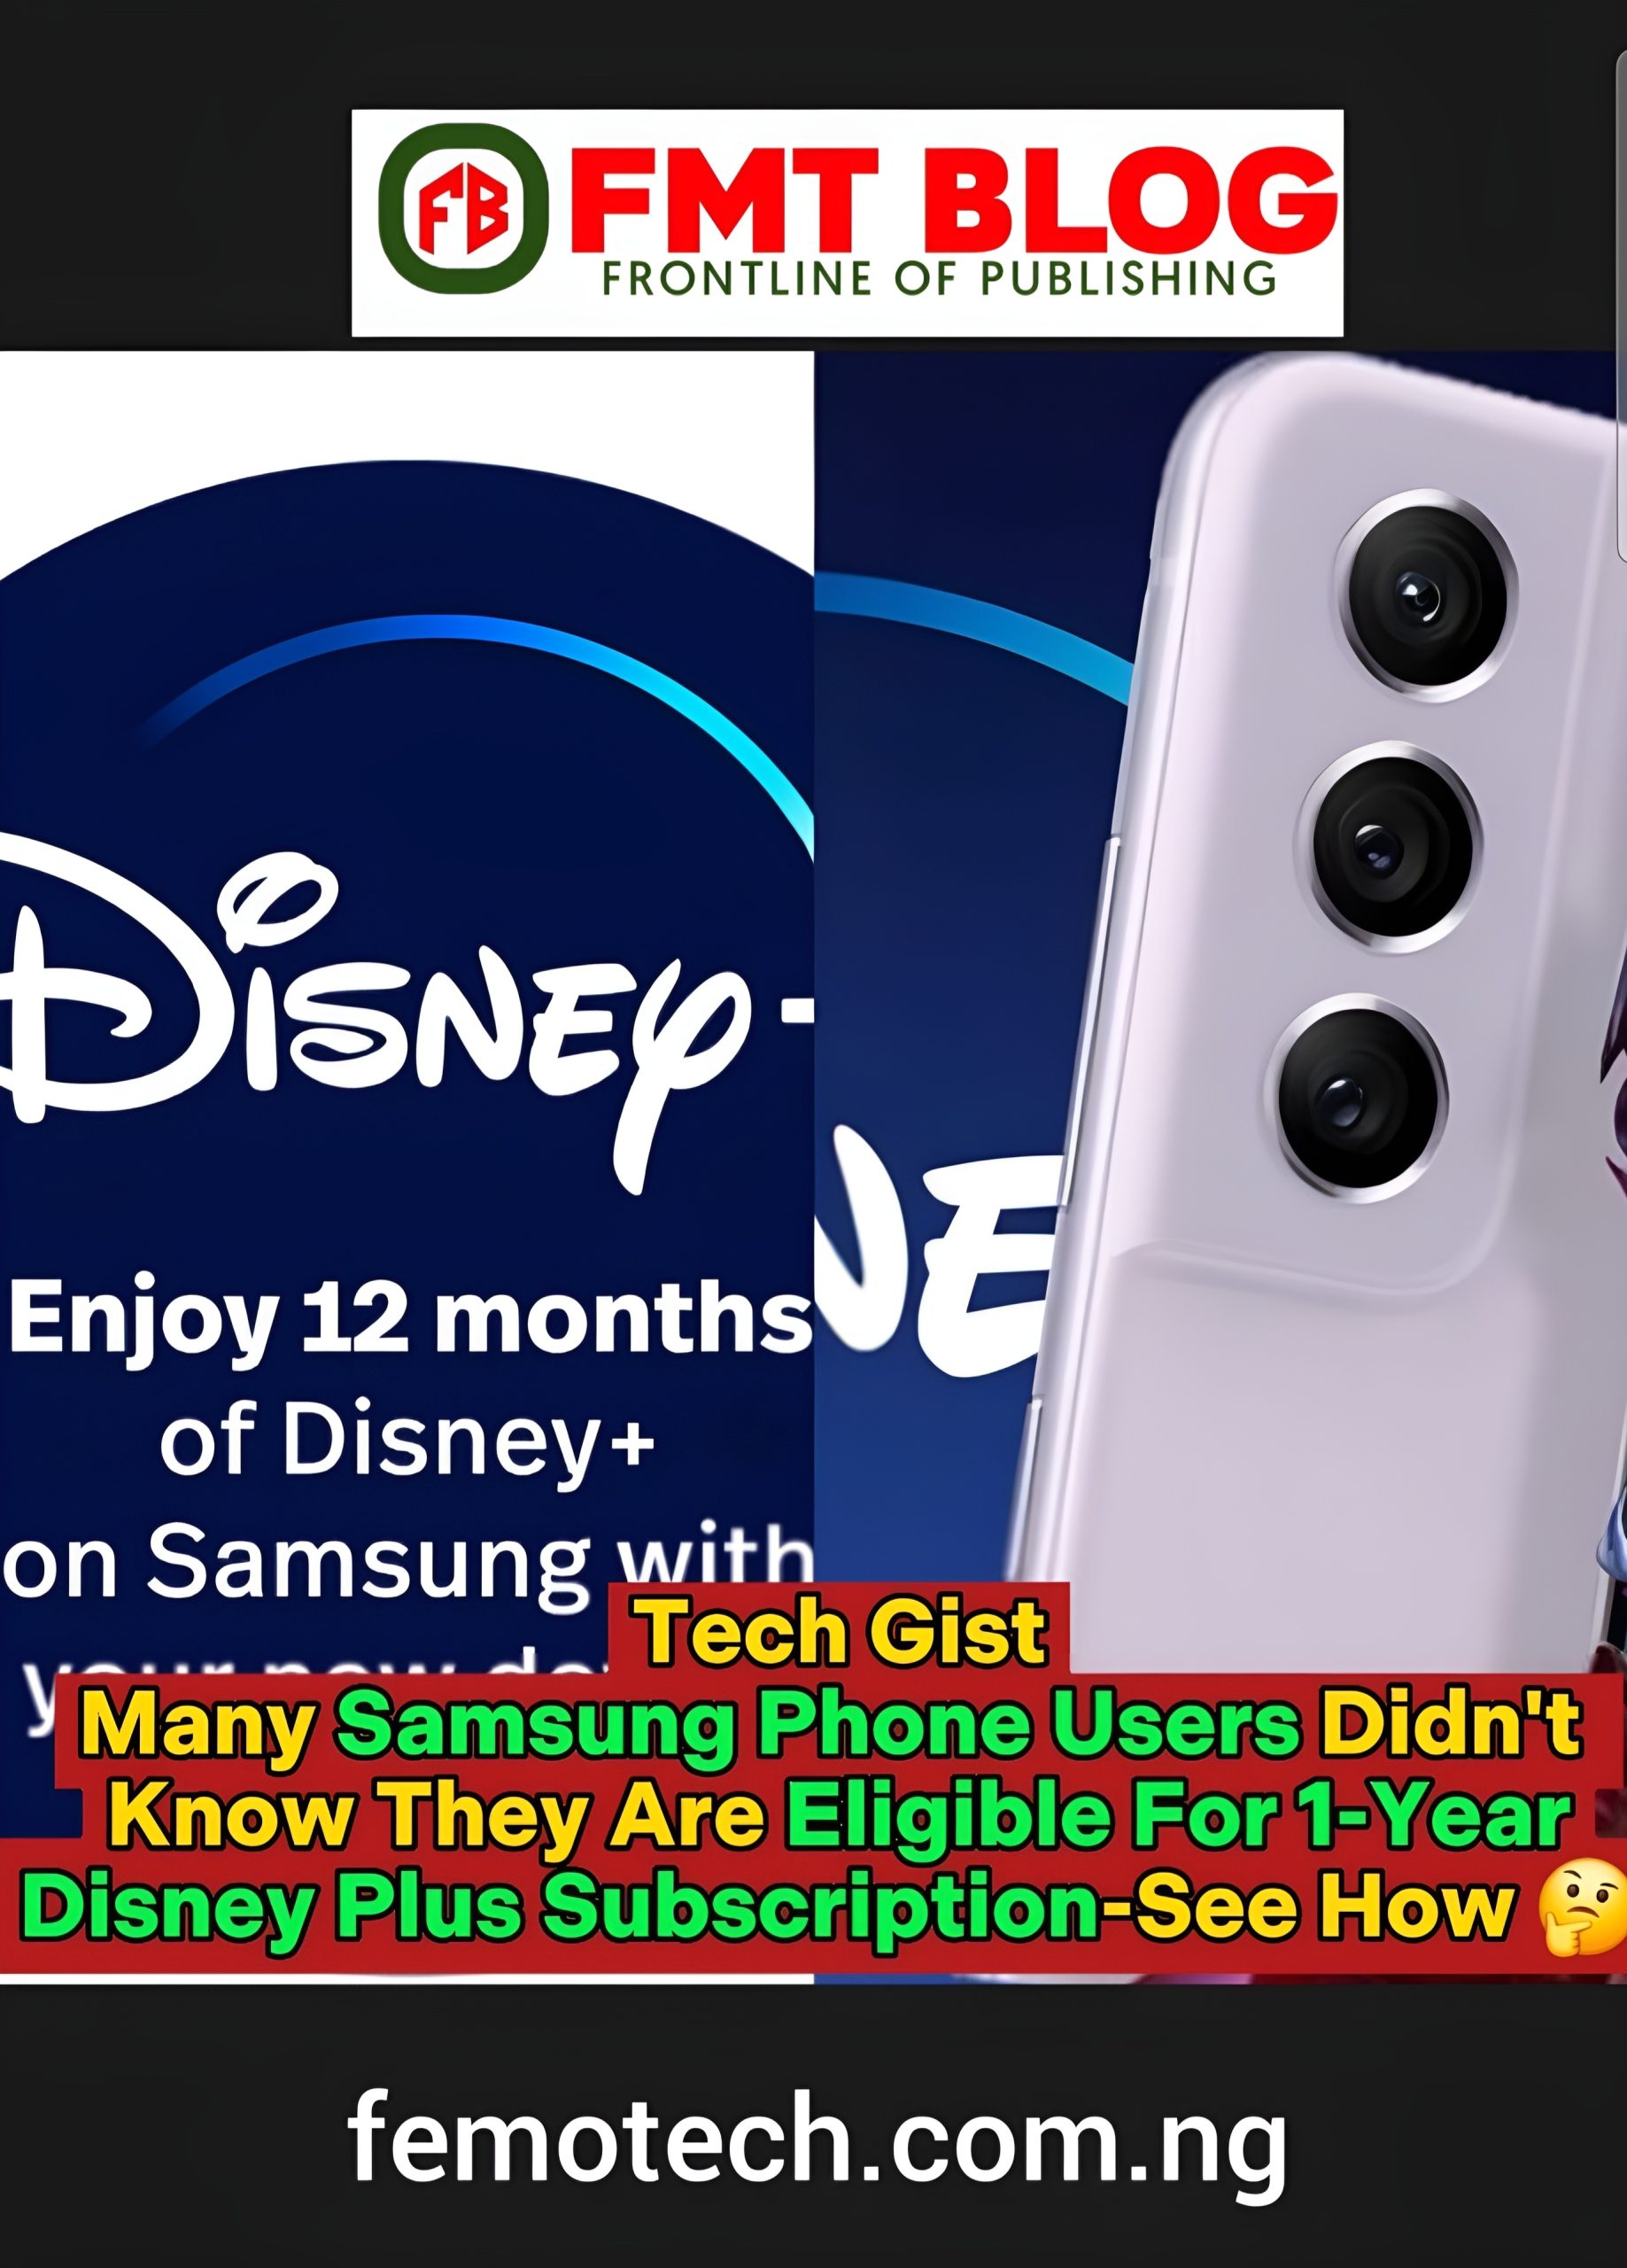 Many Samsung Phone Users Didn’t Know They Are Eligible For 1-Year DisneyPlus Subscriptions- See How